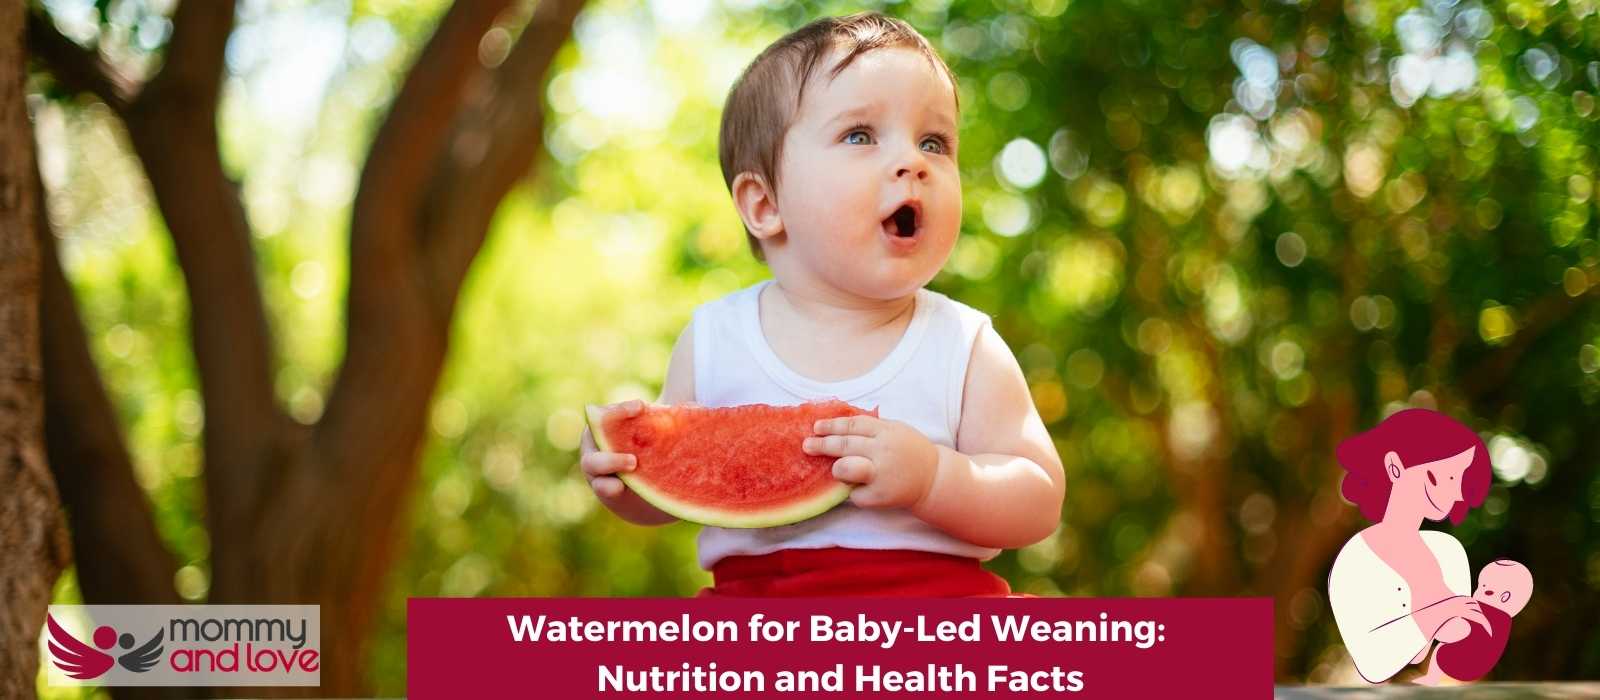 Watermelon for Baby-Led Weaning Nutrition and Health Facts